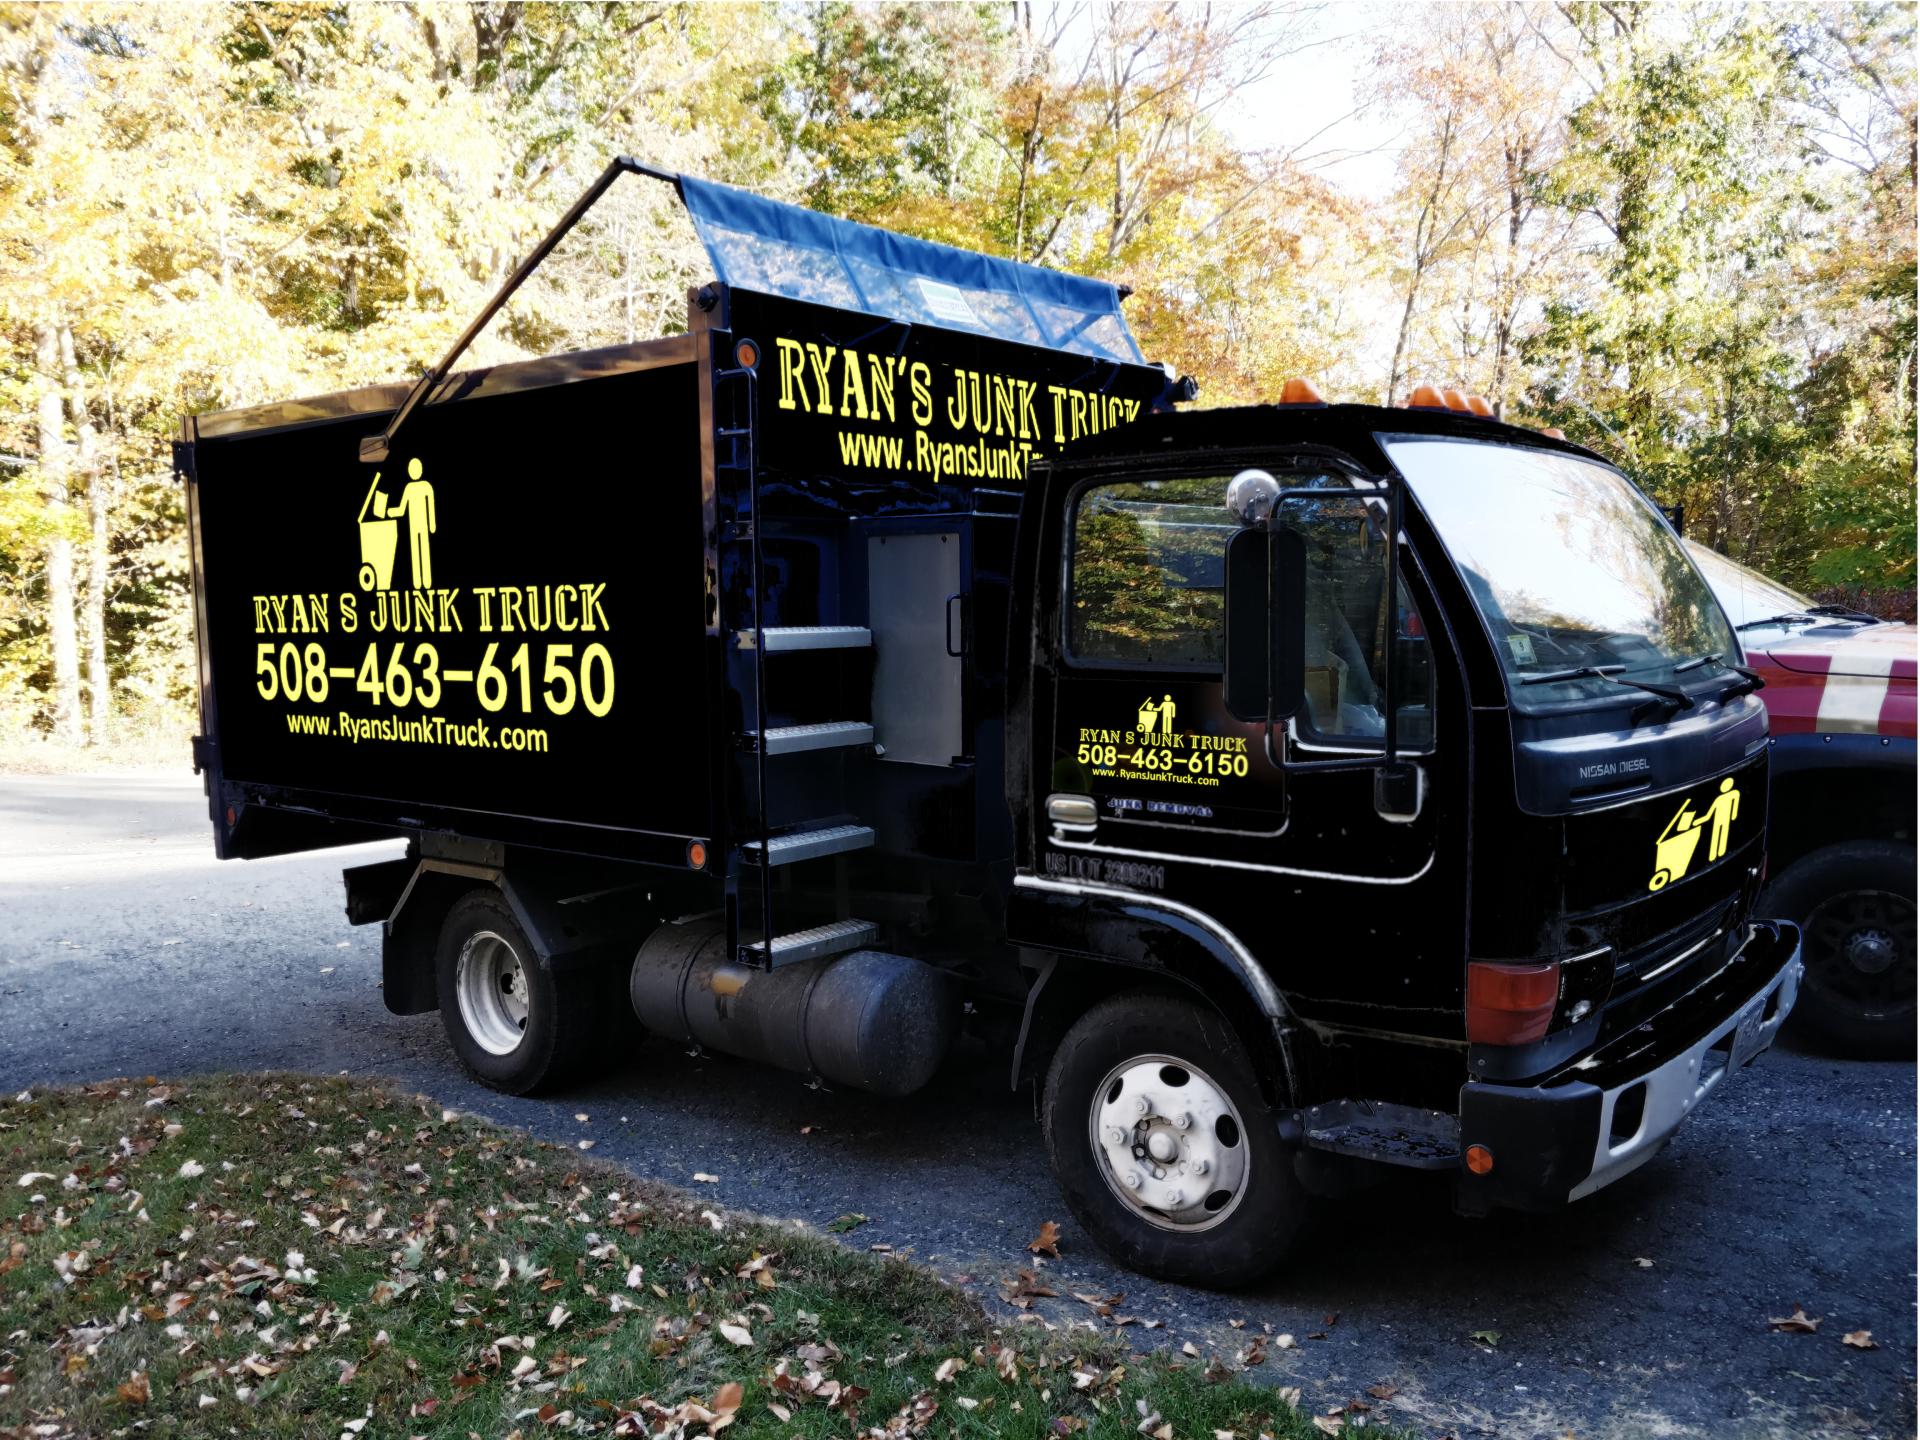 R&r Clean Up Llc - Junk Removal & Hauling Services